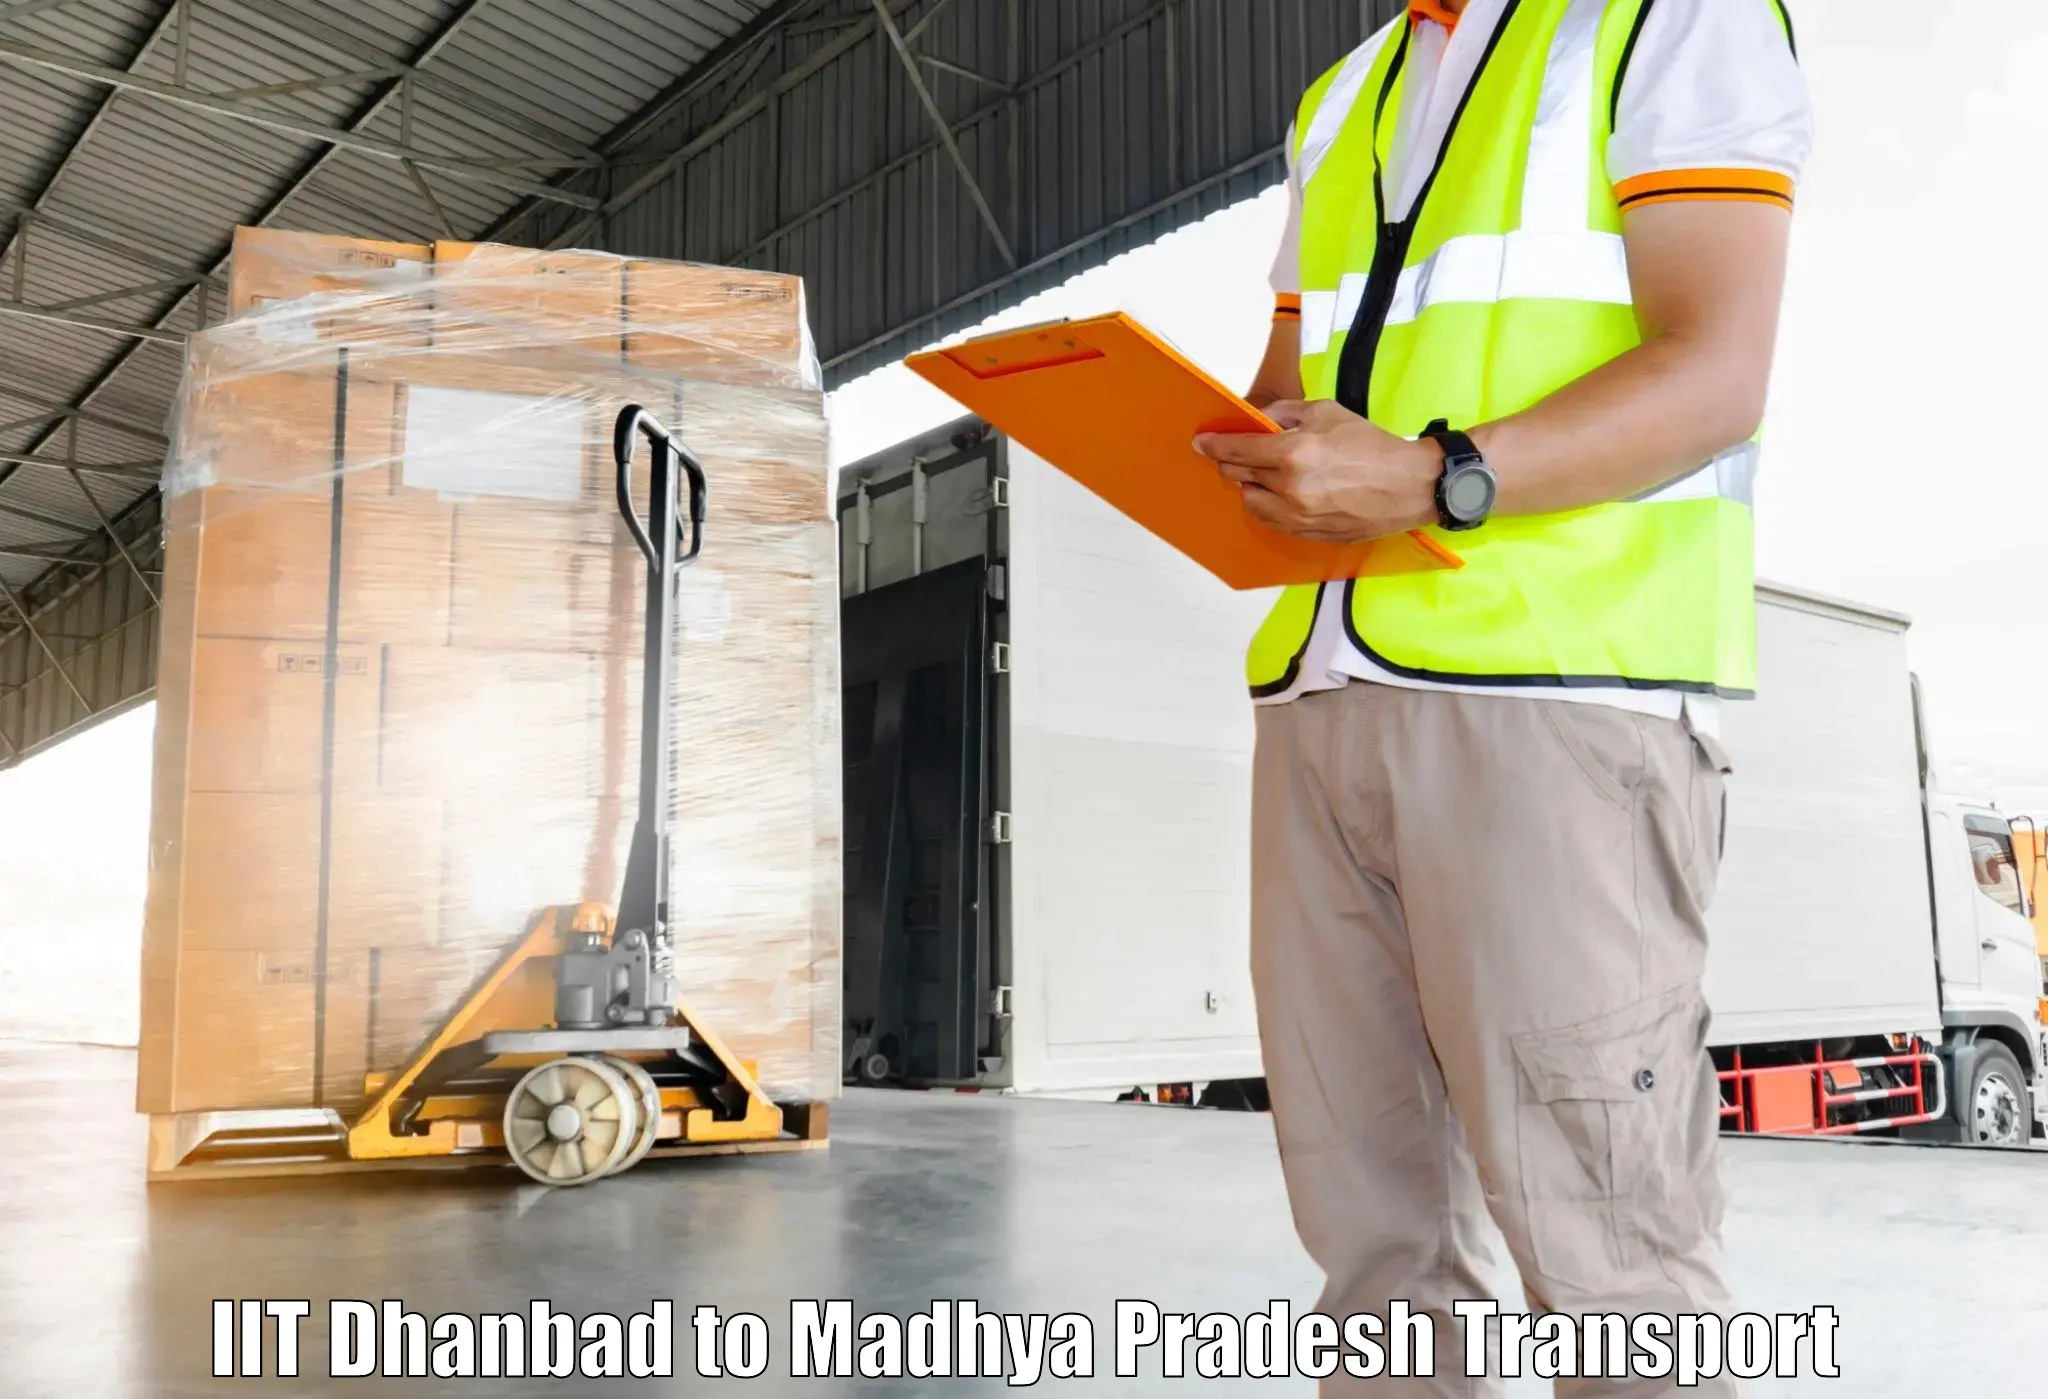 Delivery service IIT Dhanbad to Pachore